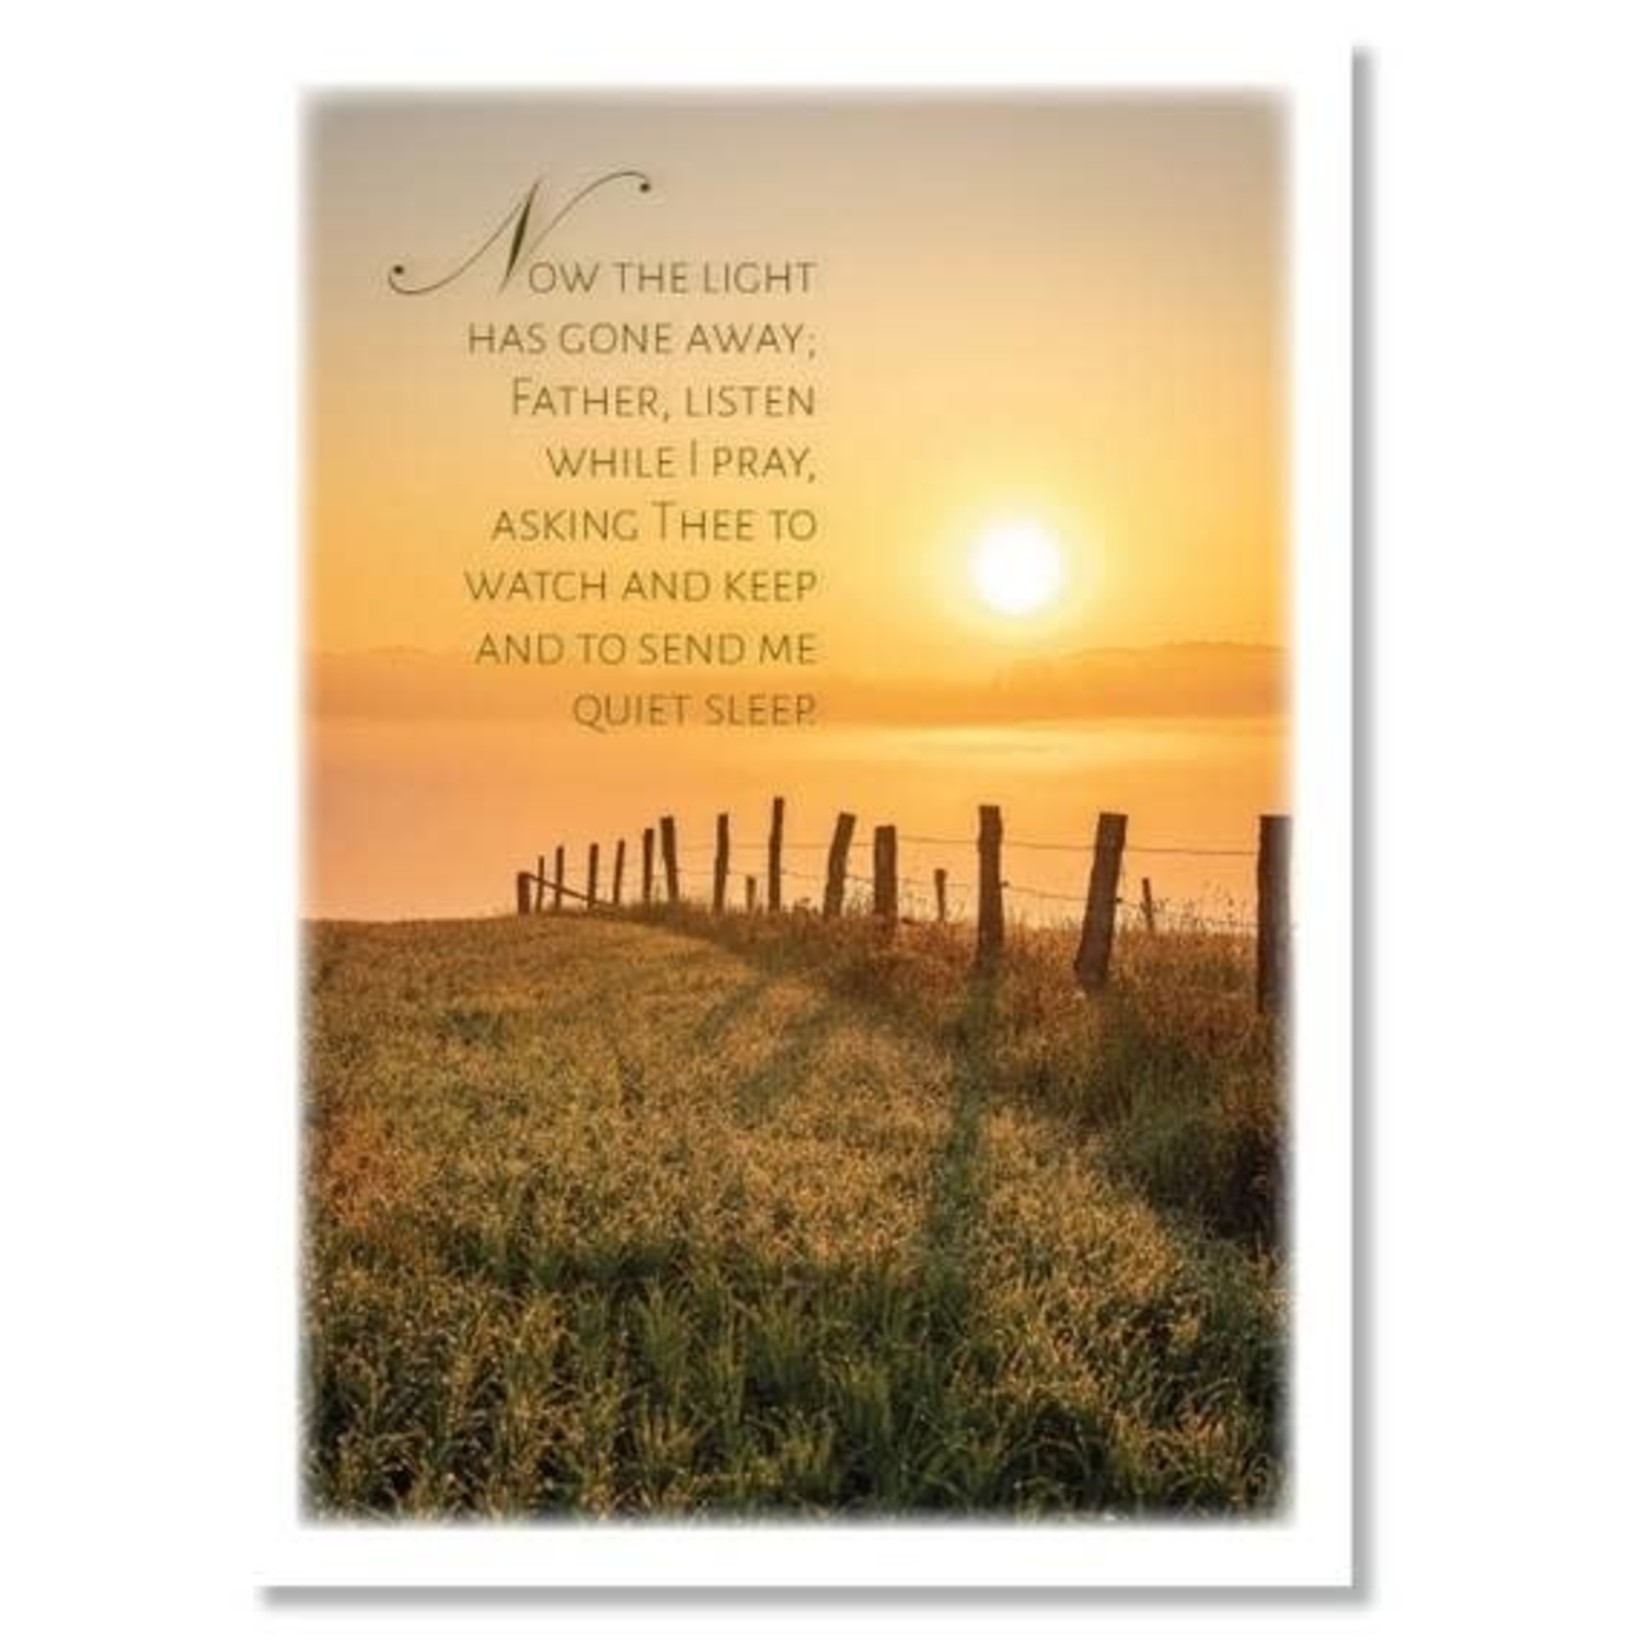 Hymns In My Heart - 5x7" Greeting Card - Thank You - Now the Light Has Gone Away